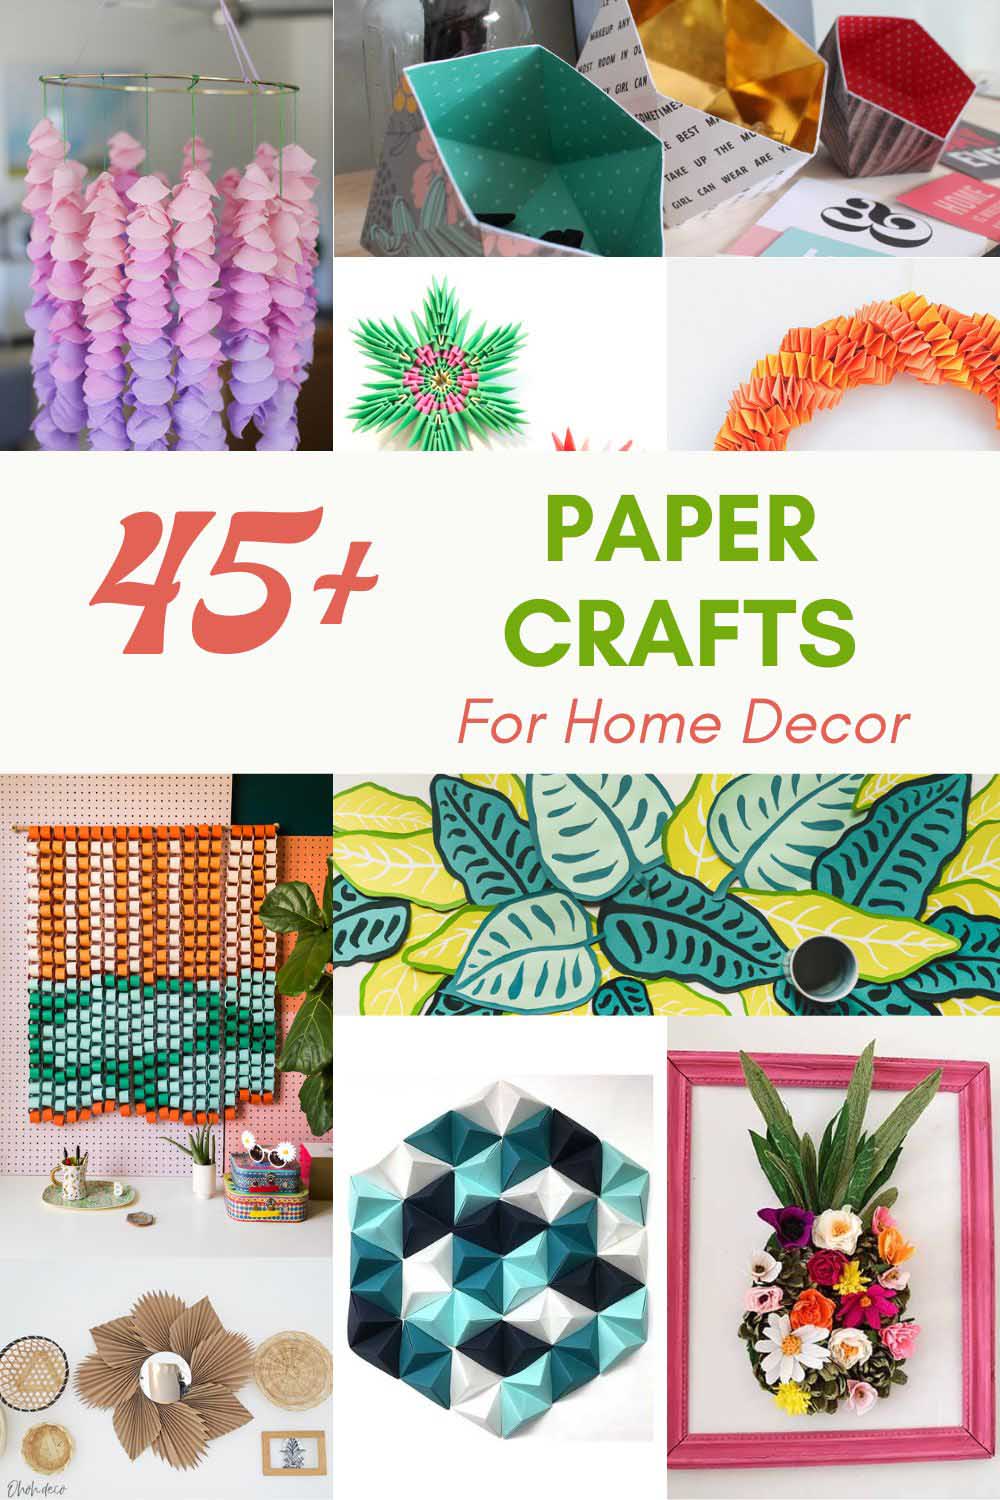 45 Charming Paper Crafts For Home Decor to Brighten Your Space - Pillar Box  Blue